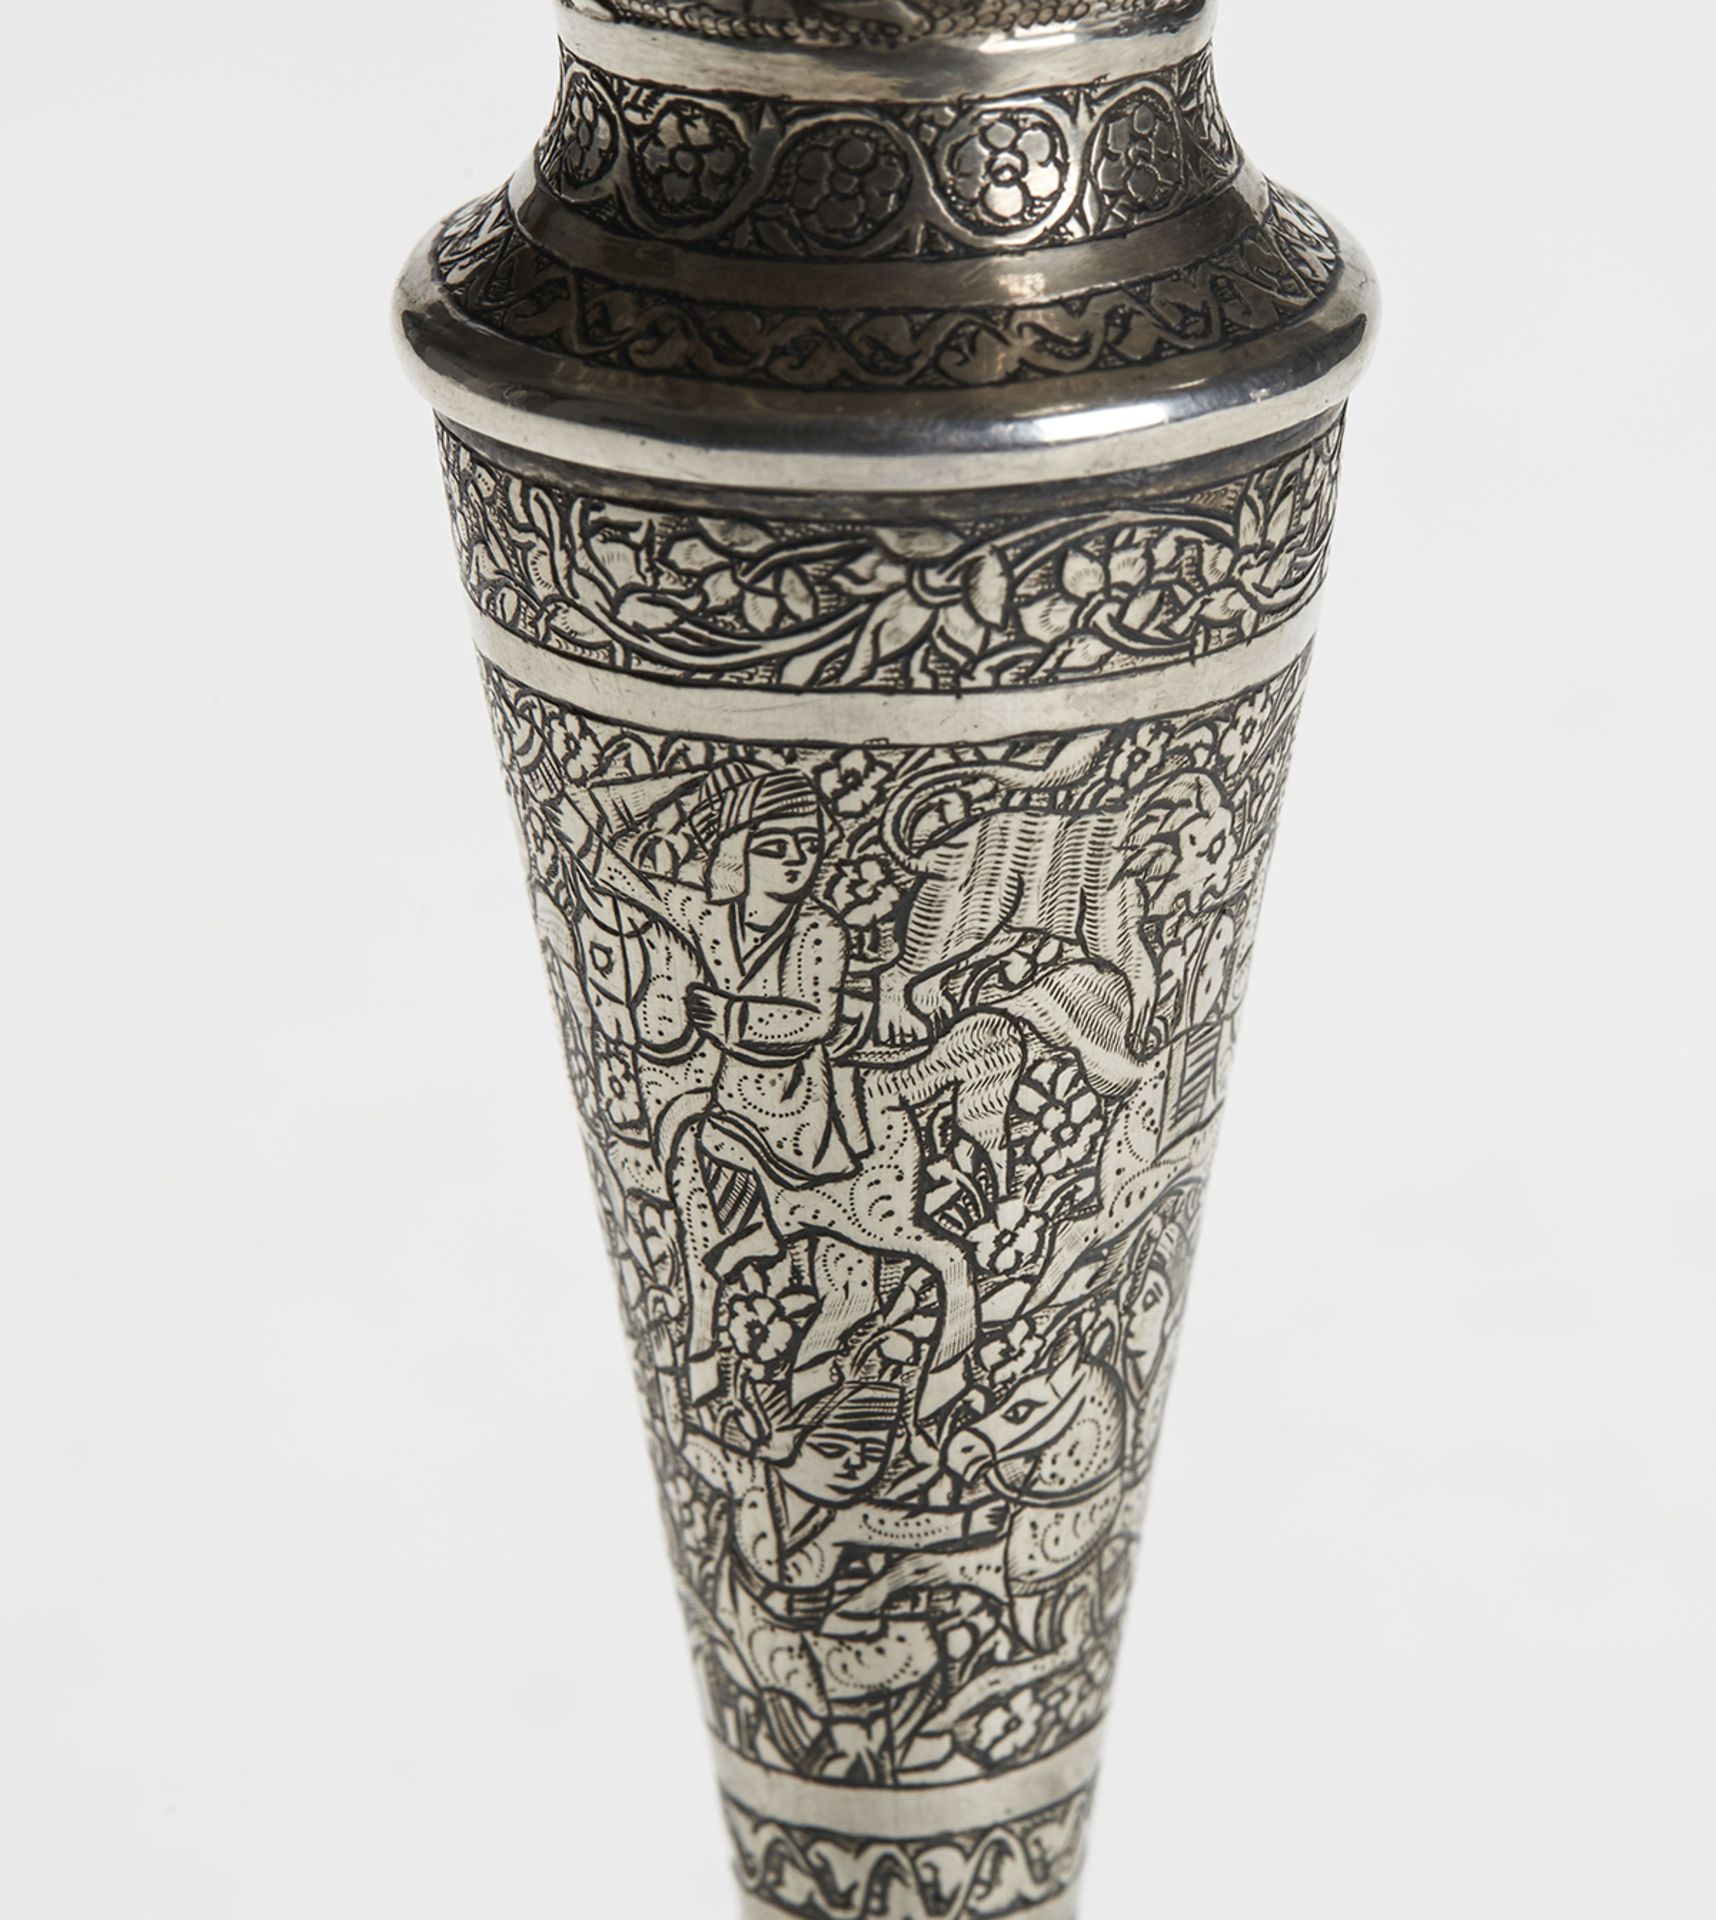 Antique Indian/Asian Silver Figural Vase 19Th C. - Image 3 of 9